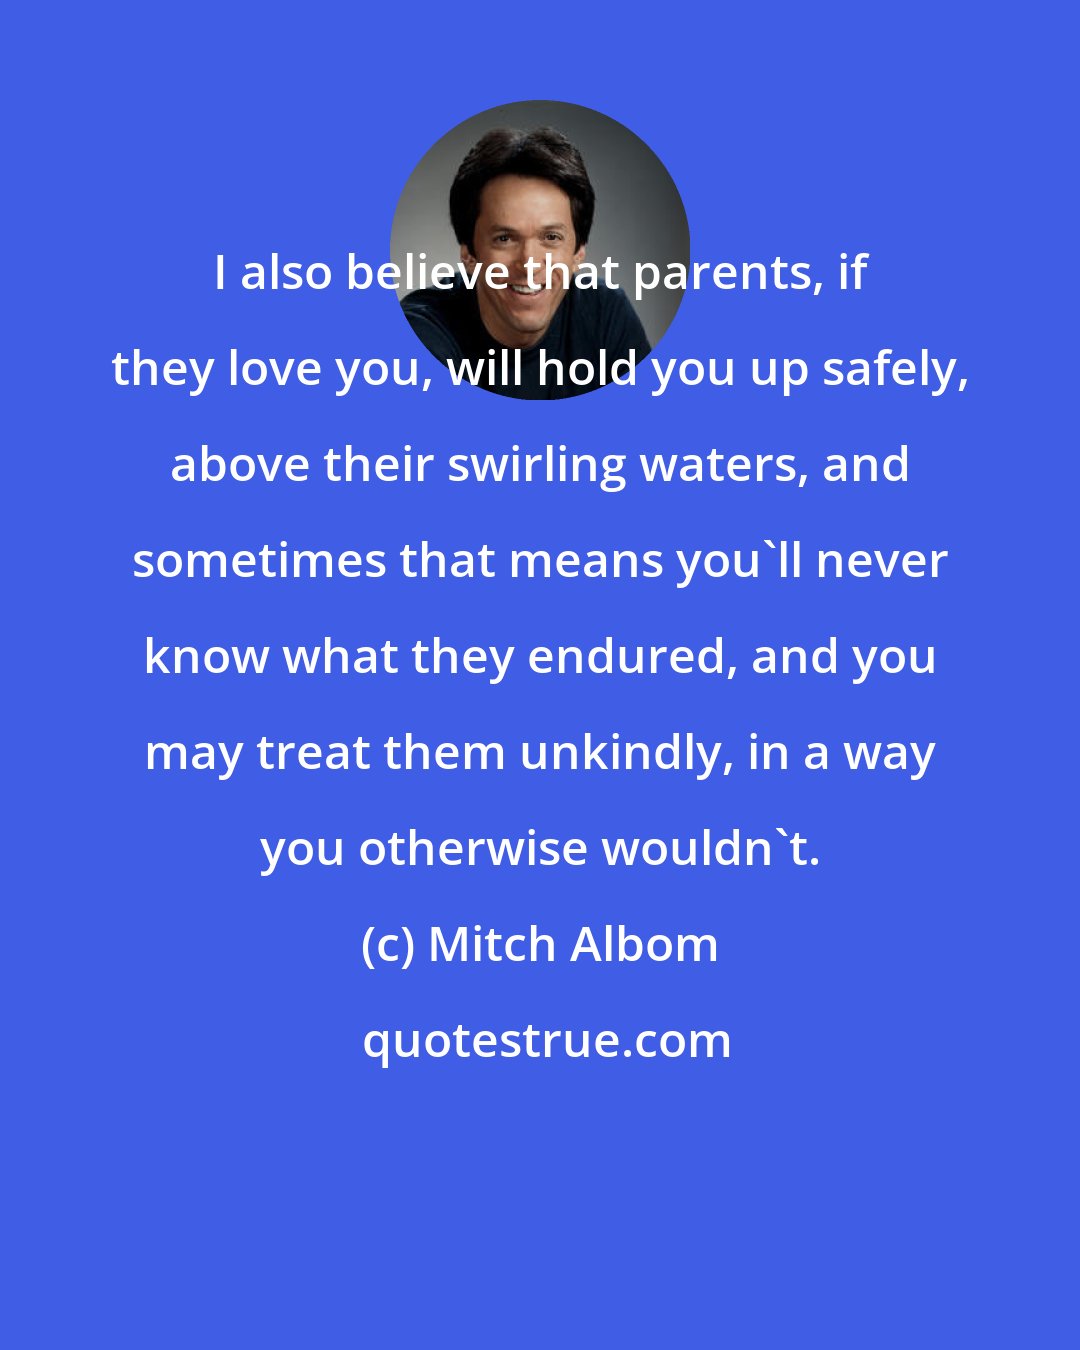 Mitch Albom: I also believe that parents, if they love you, will hold you up safely, above their swirling waters, and sometimes that means you'll never know what they endured, and you may treat them unkindly, in a way you otherwise wouldn't.